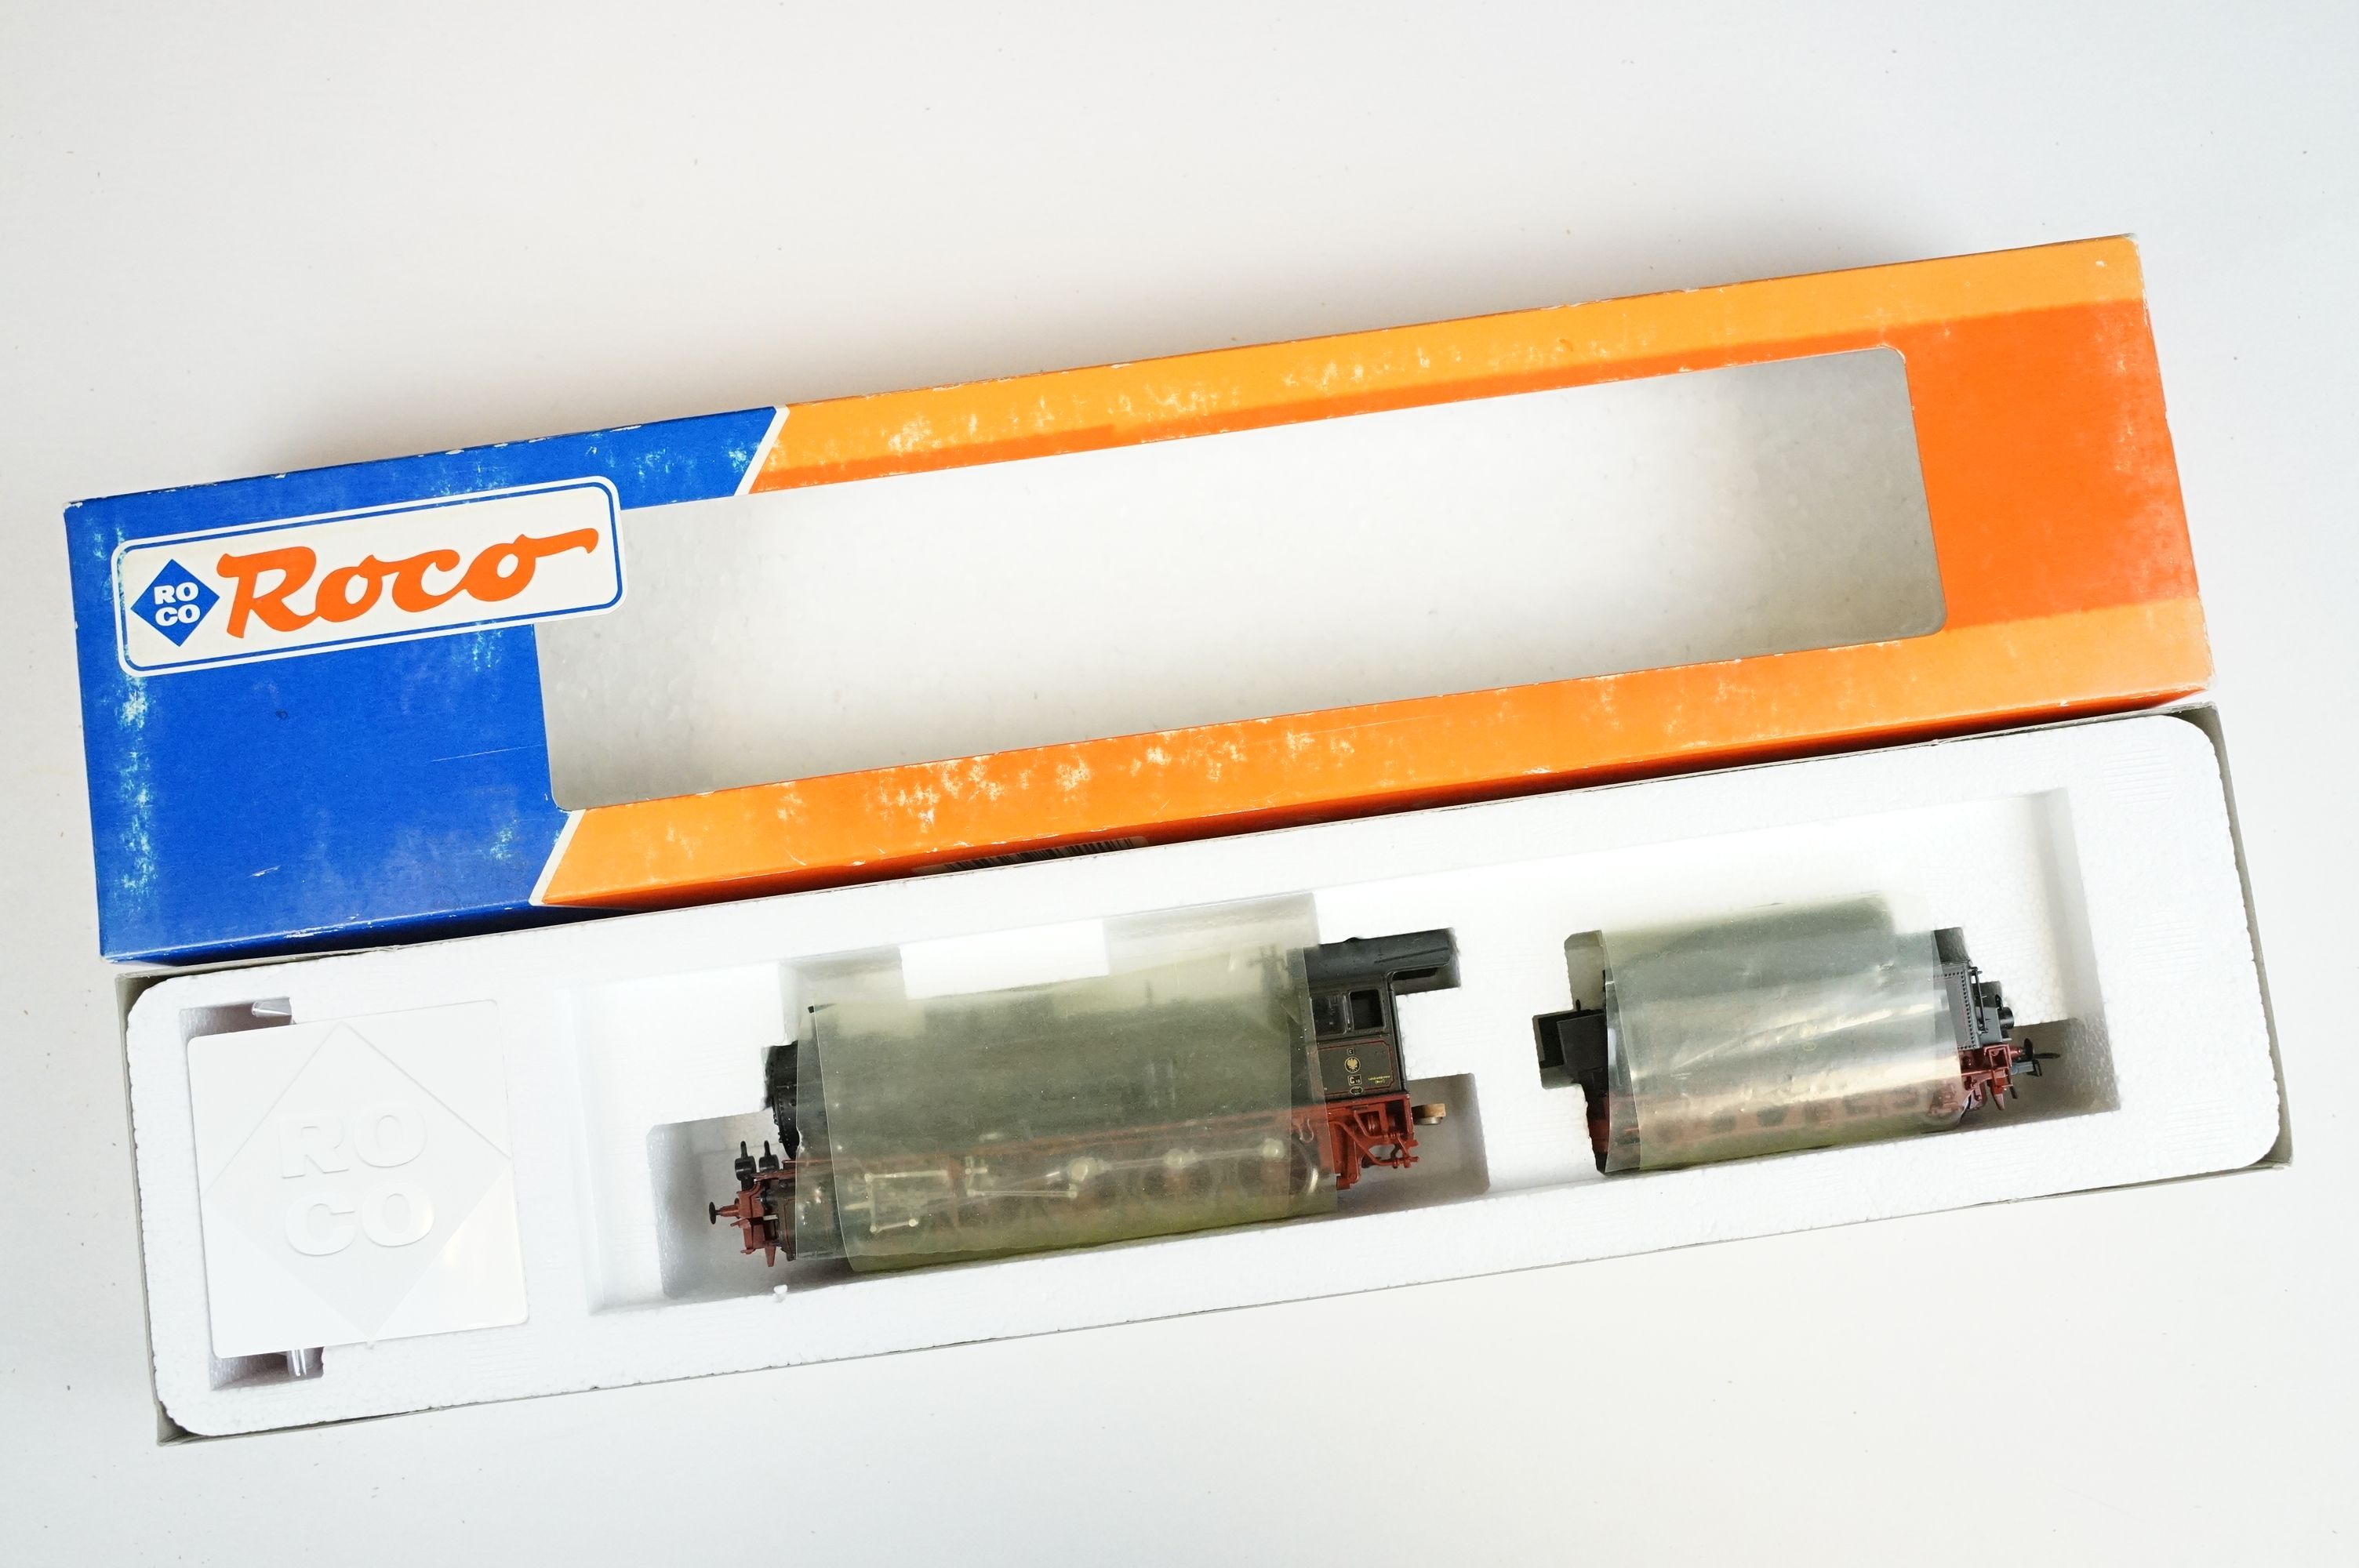 Four boxed Roco HO gauge locomotives to include 43221, 63460, 63475 & 63390 - Image 4 of 11